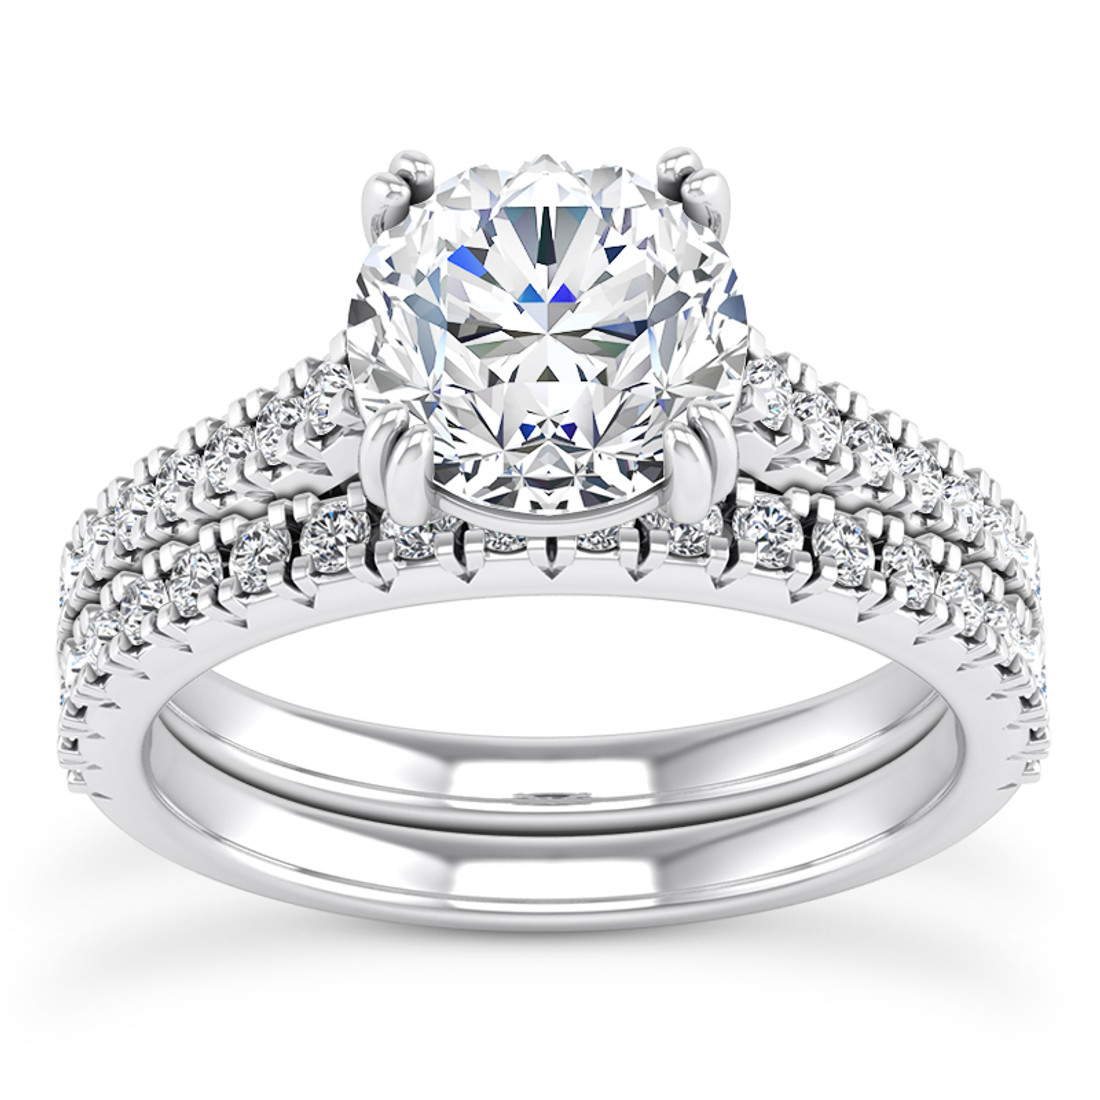 JLo's Ring: The Perfect Teardrop Sapphire Engagement Ring Set with Pave  Wedding Band | Diamond Registry